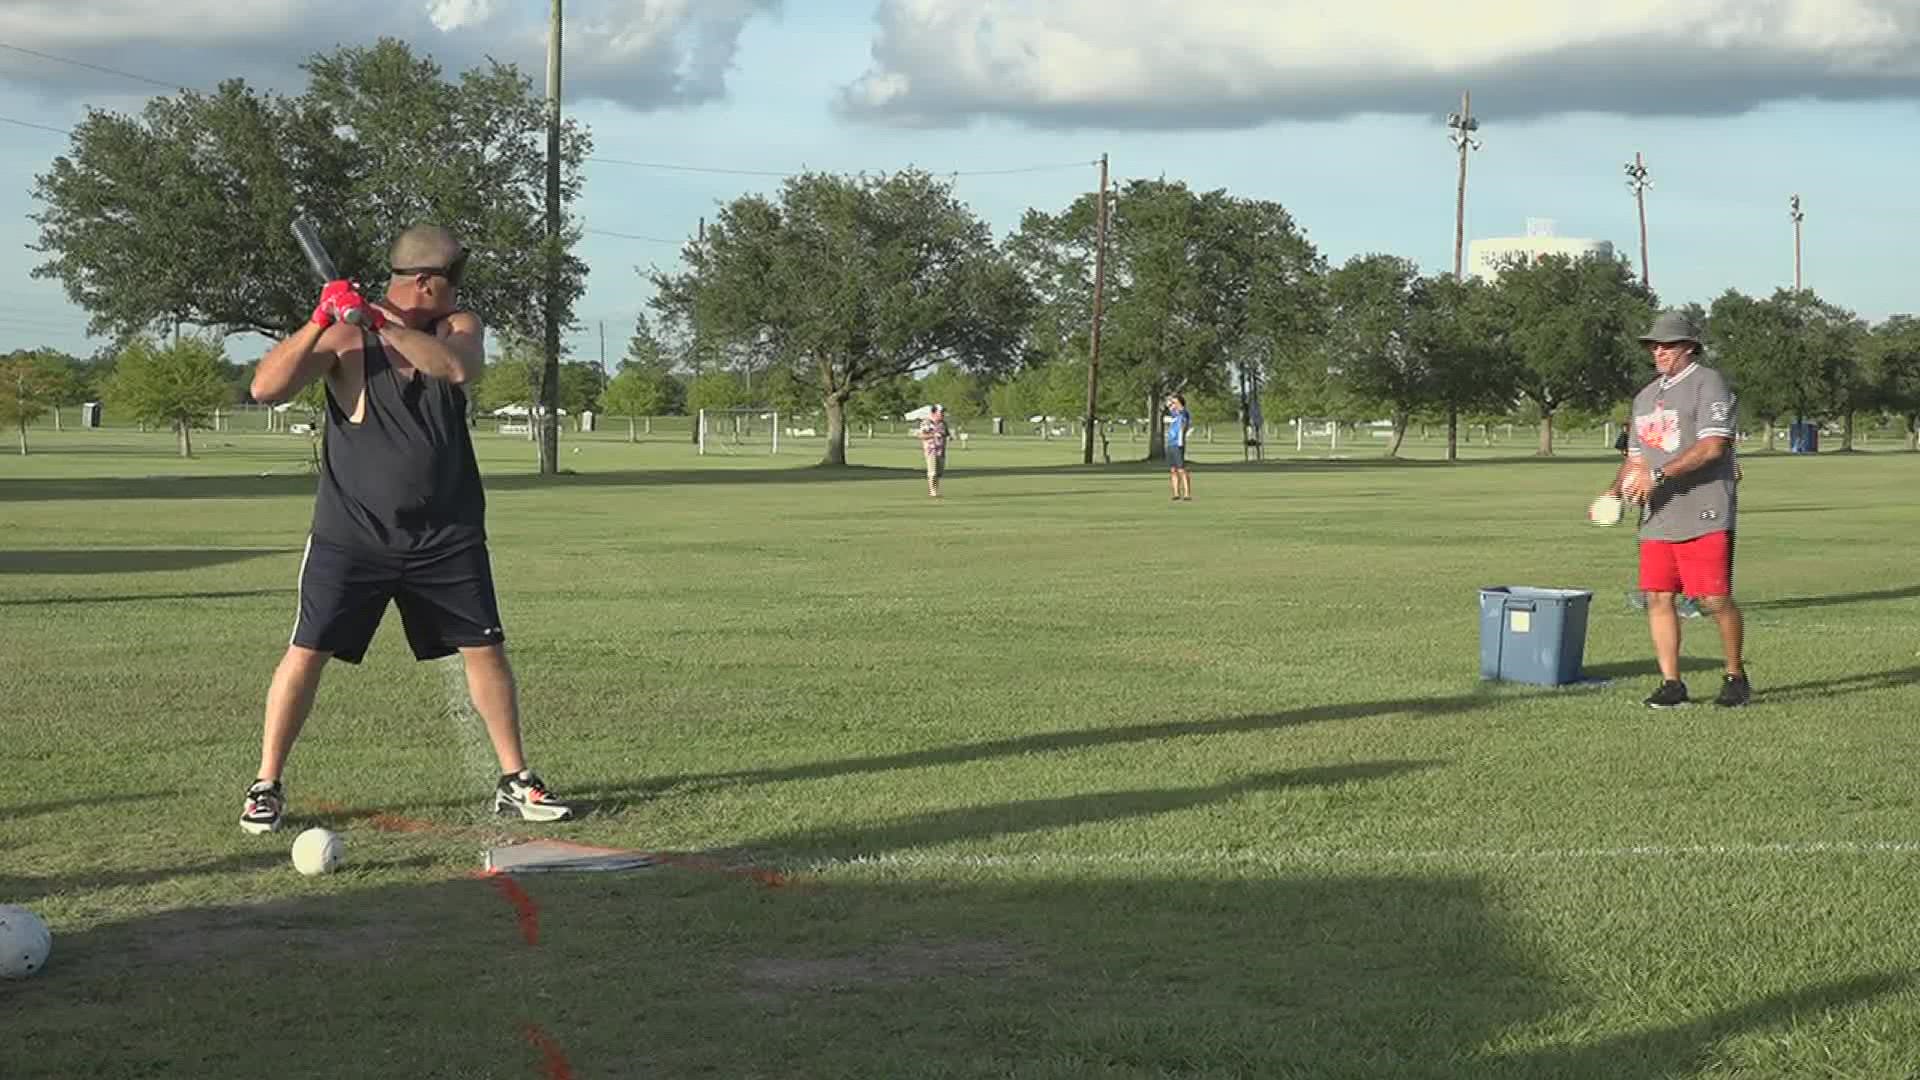 Teams from across the country get a taste of southeast Texas at the Beep Baseball World Series.